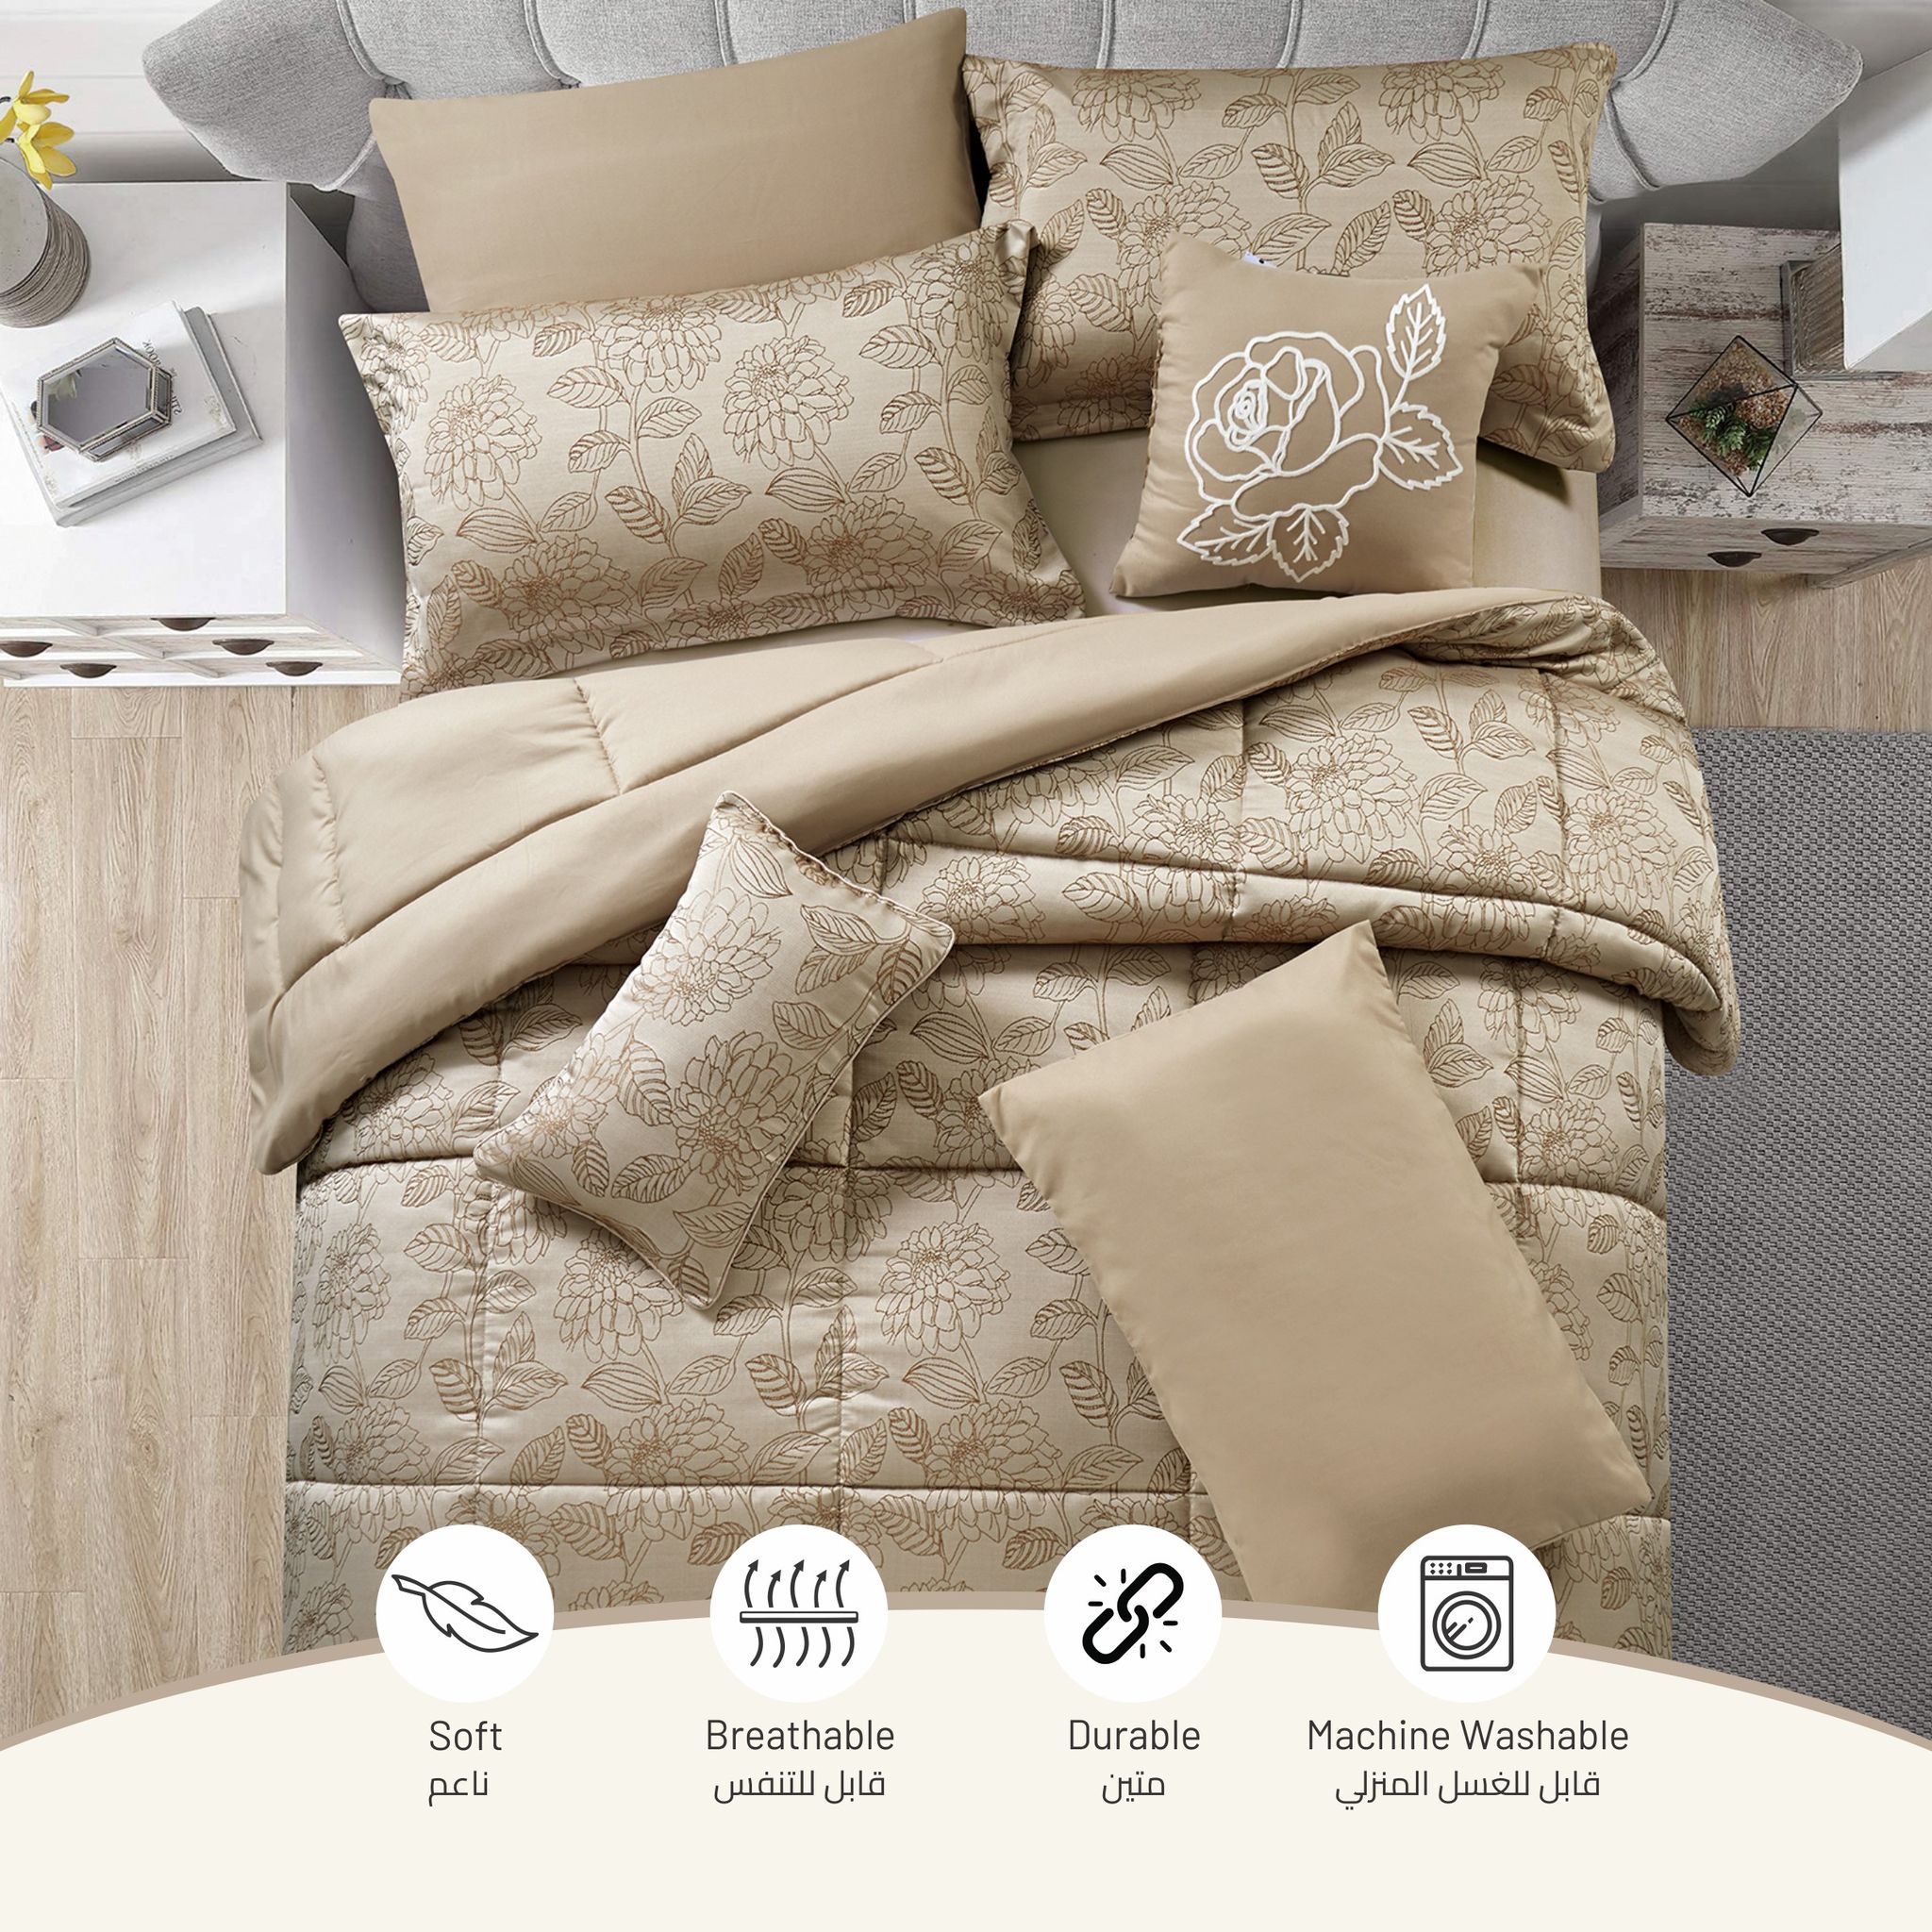 Hotel Bedding Comforter Set Single Size 5-Pcs Luxury And Stylish Quilted Comforter With Brushed Microfiber And Soft Down Alternative Filling,Dark Beige